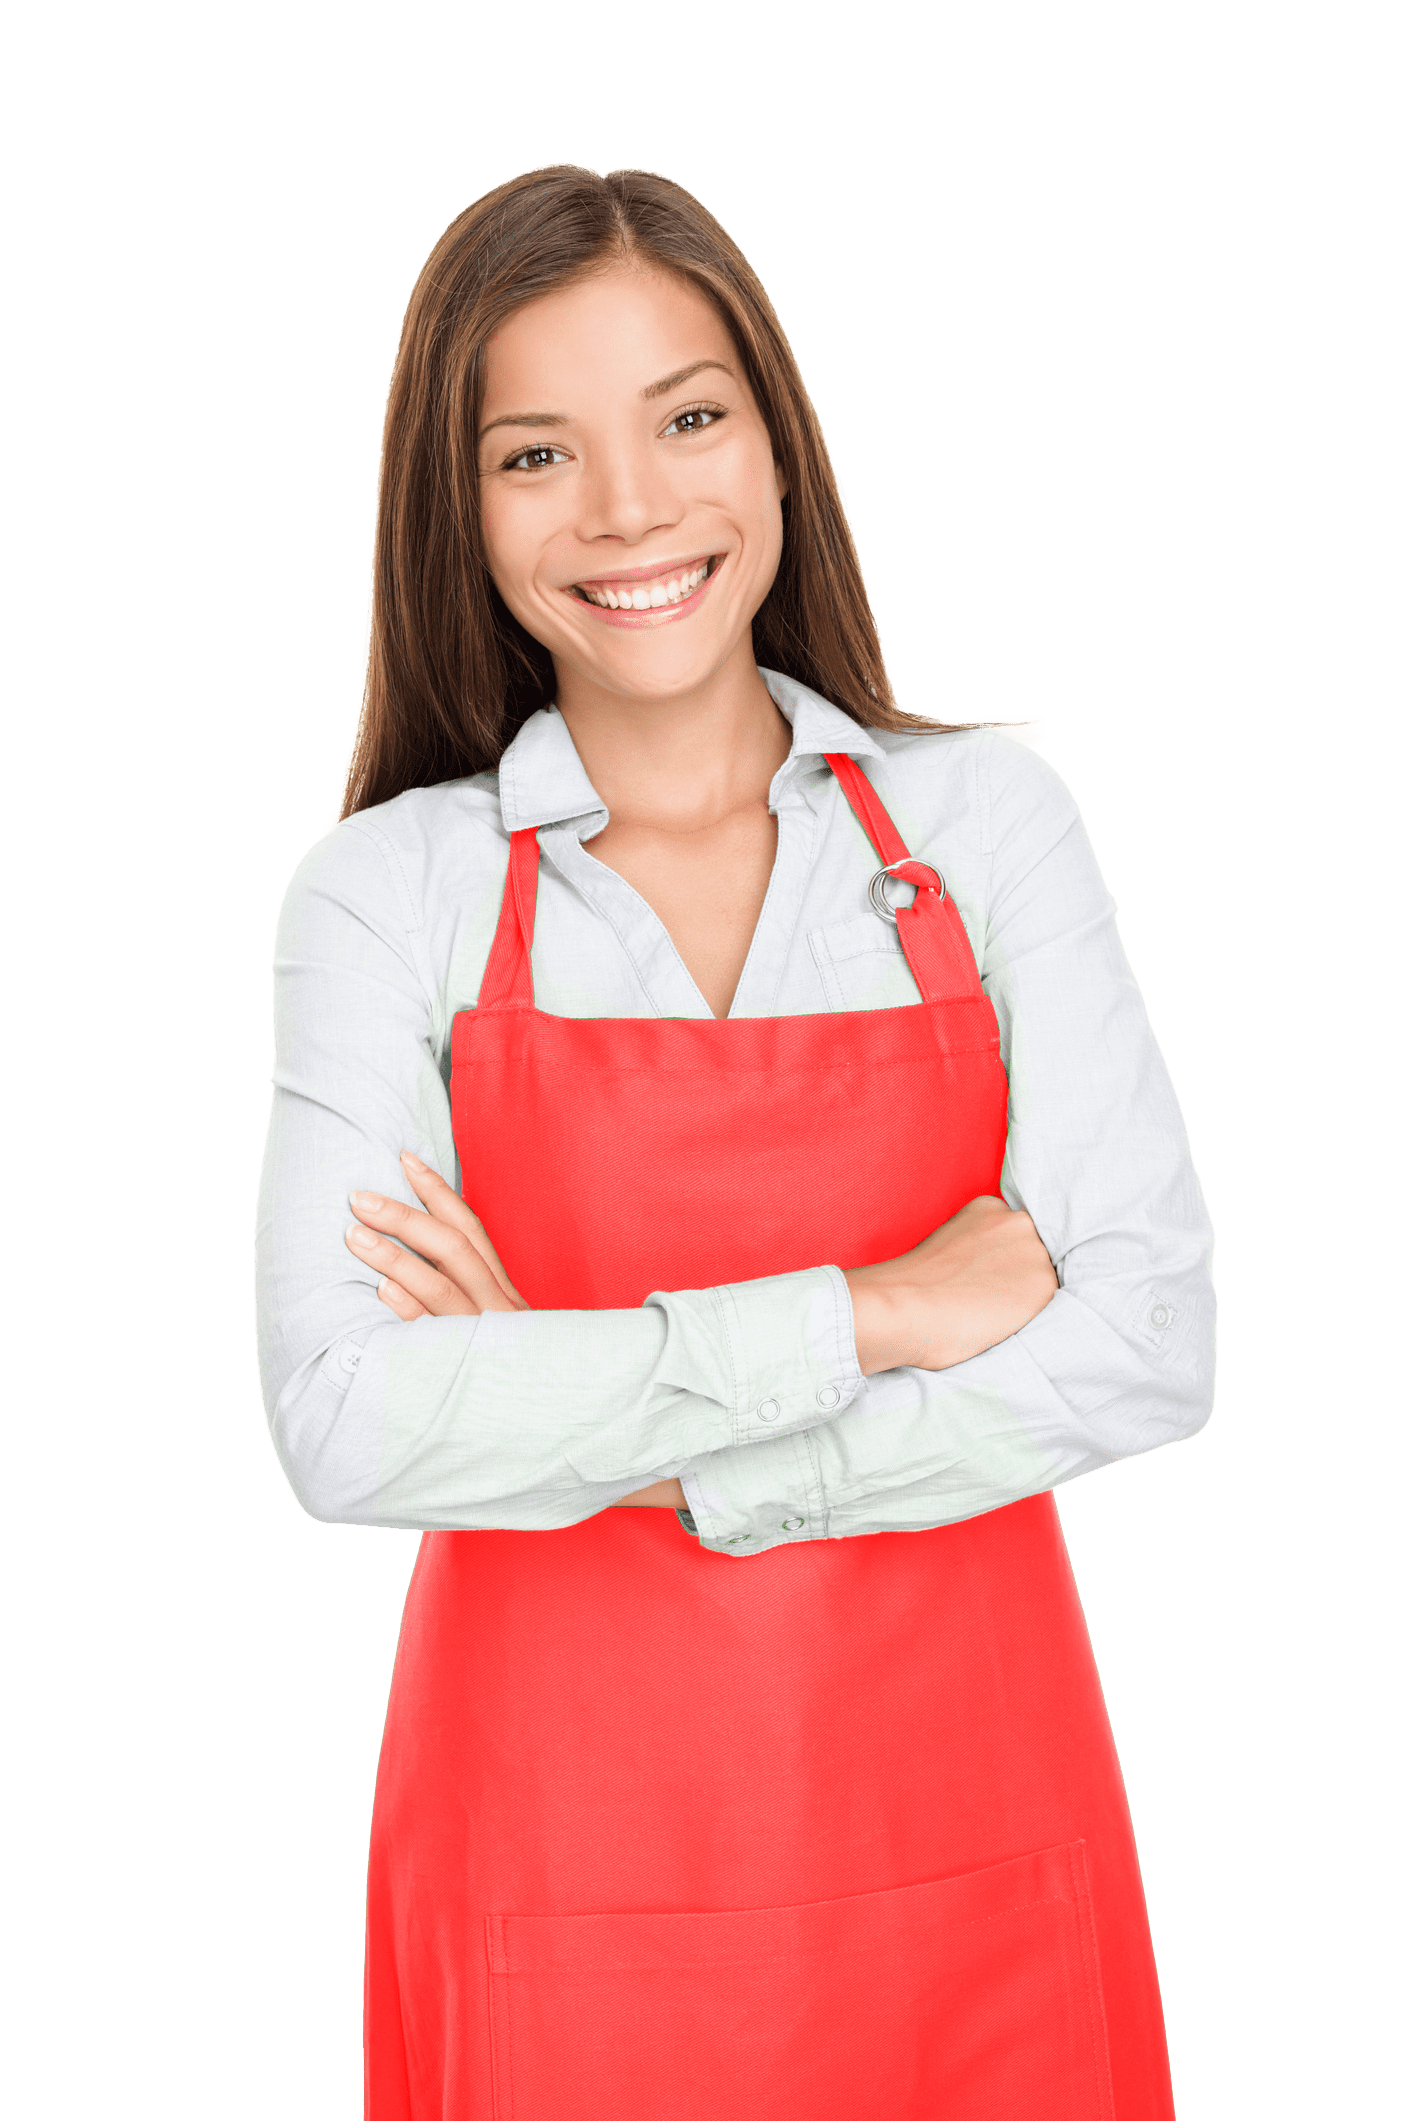 Smiling young woman wearing red apron